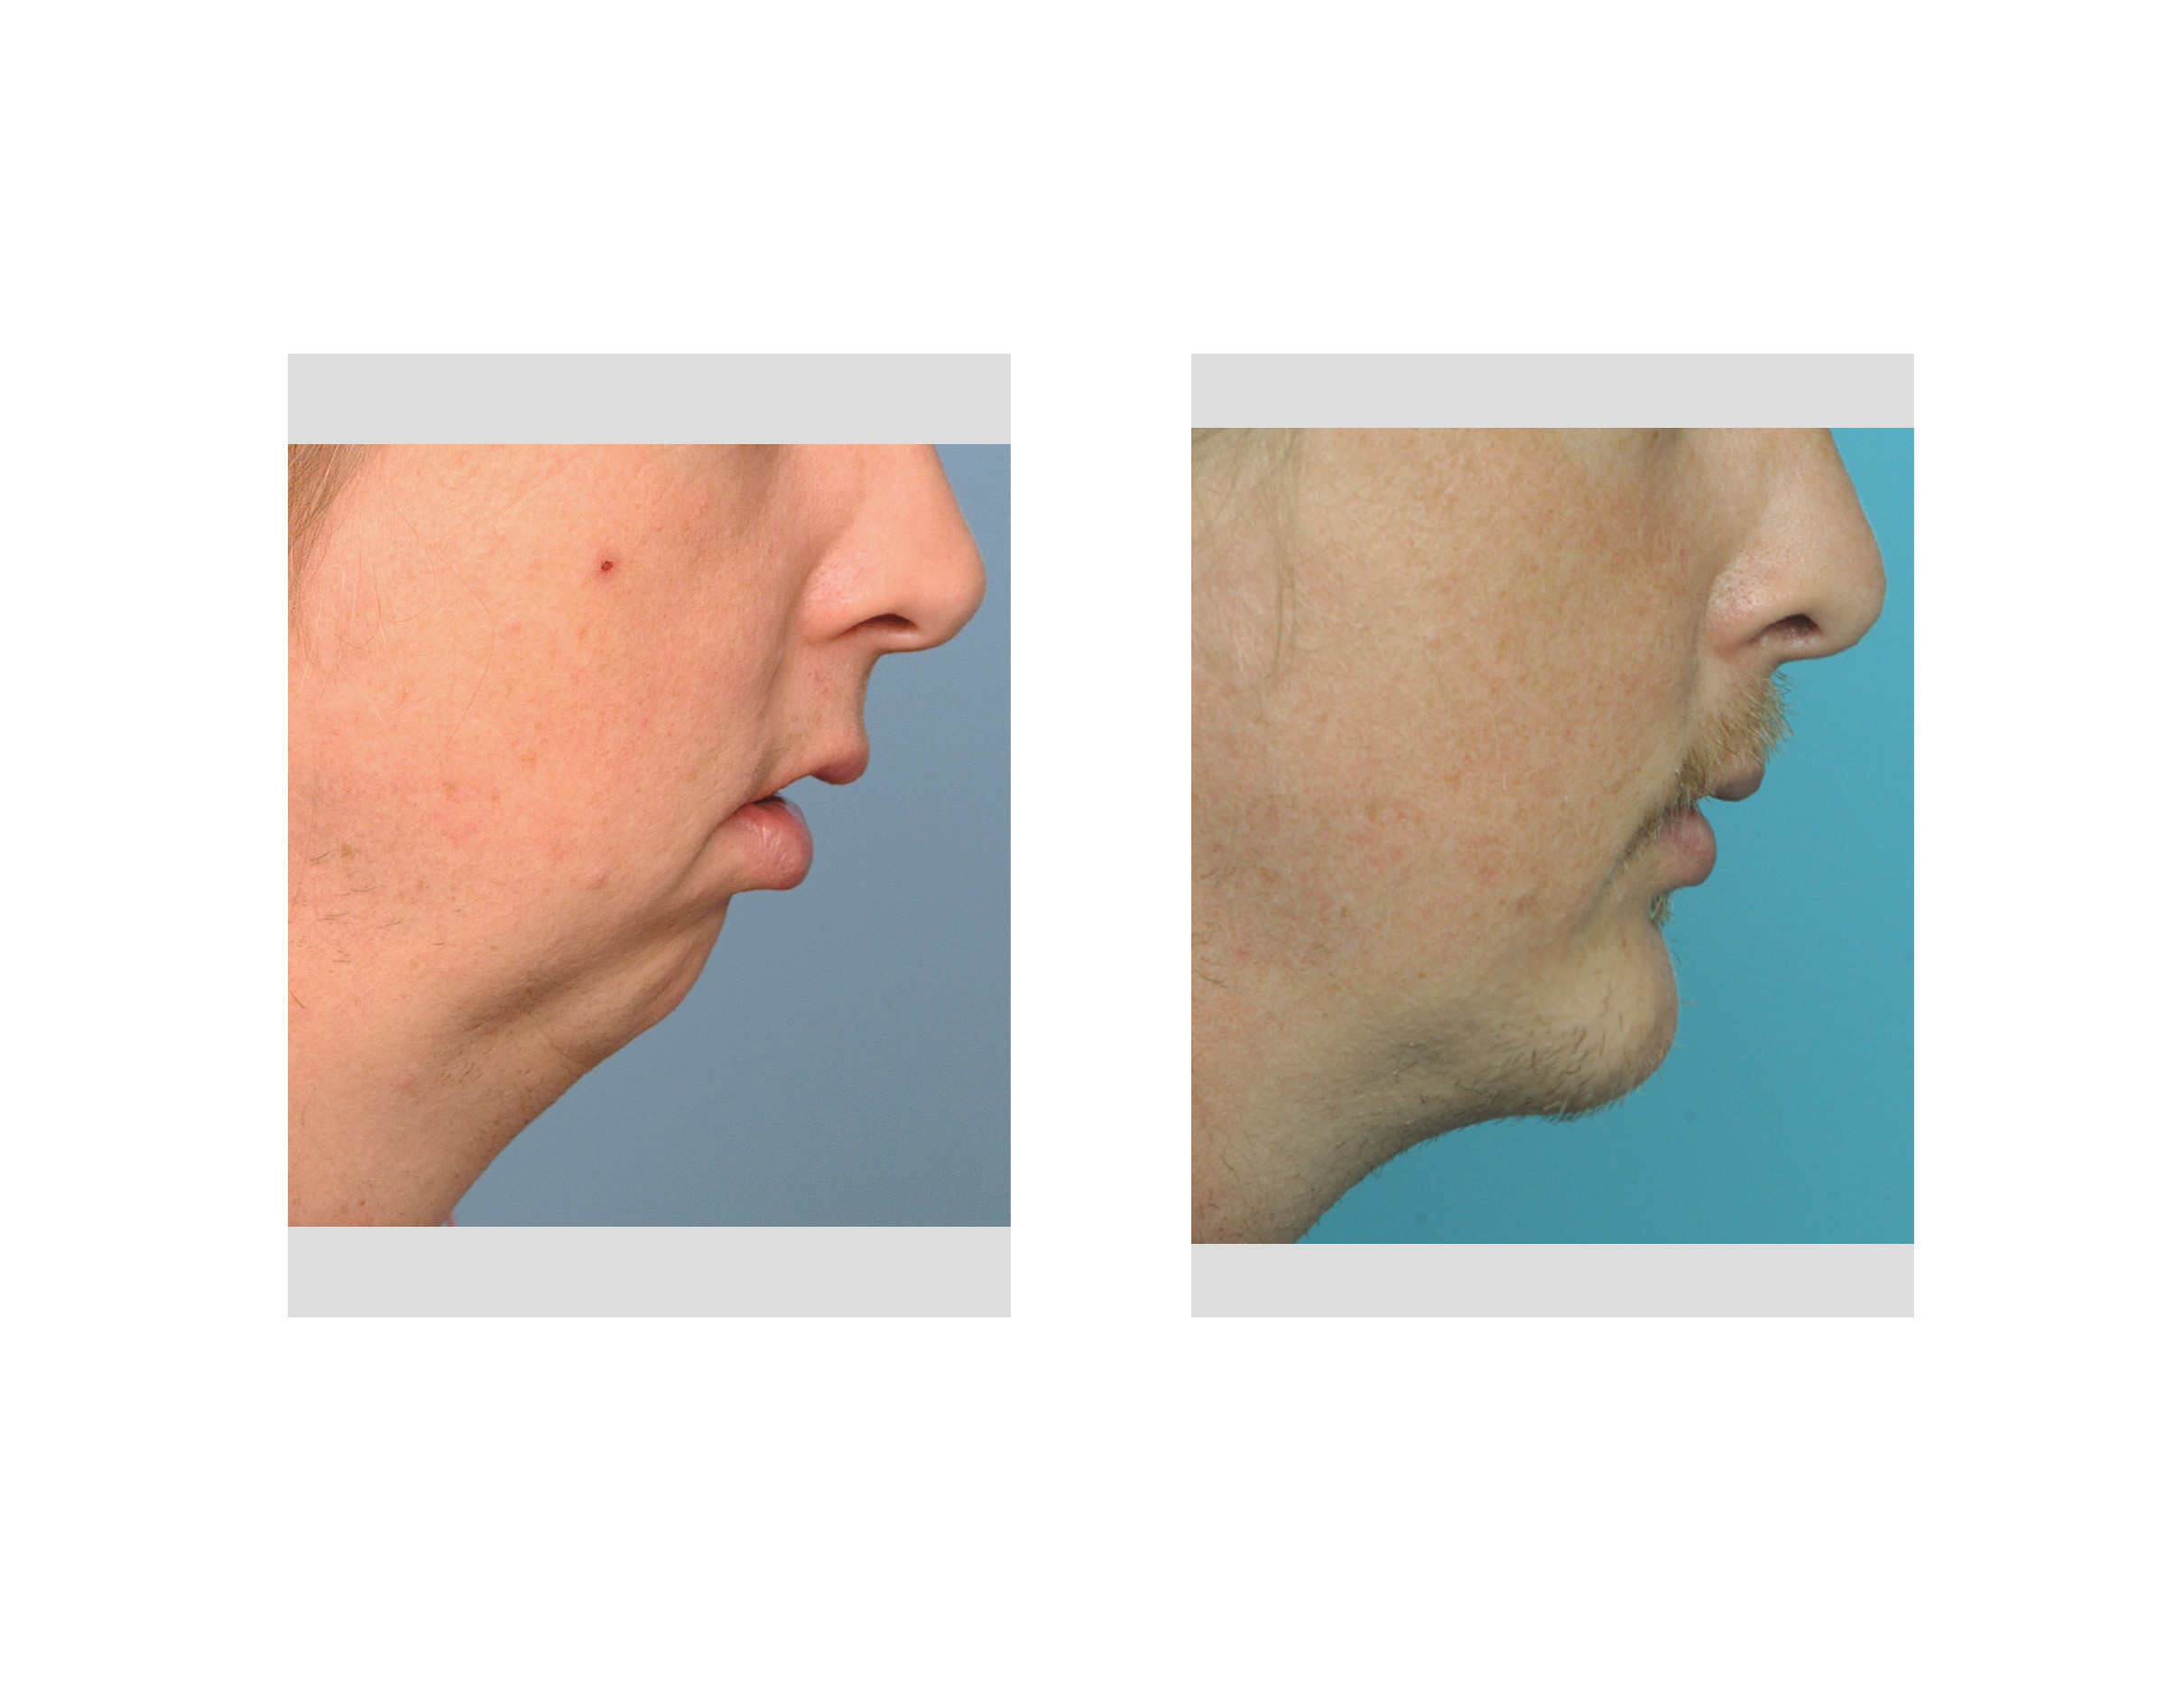 Chin-Osteotomy-and-Implant-Augmentation-result-side-view-Dr-Barry-Eppley-Indianapolis.jpg